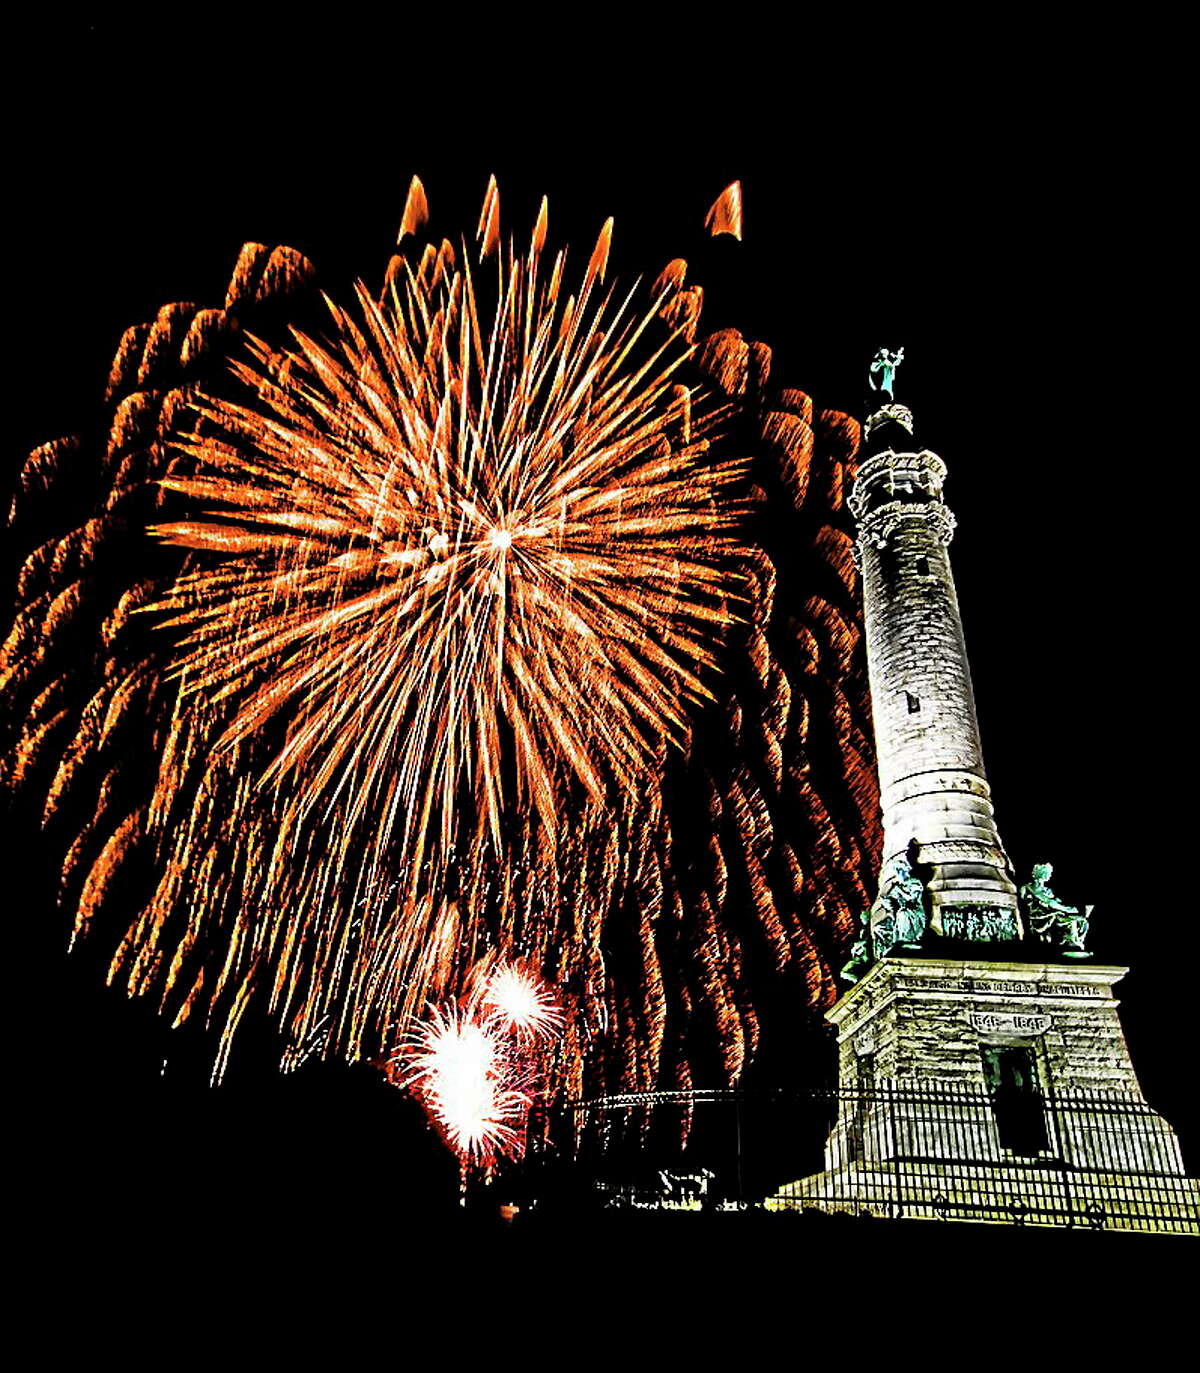 Fireworks light up the summit of East Rock Park in New Haven on the Fourth of July.